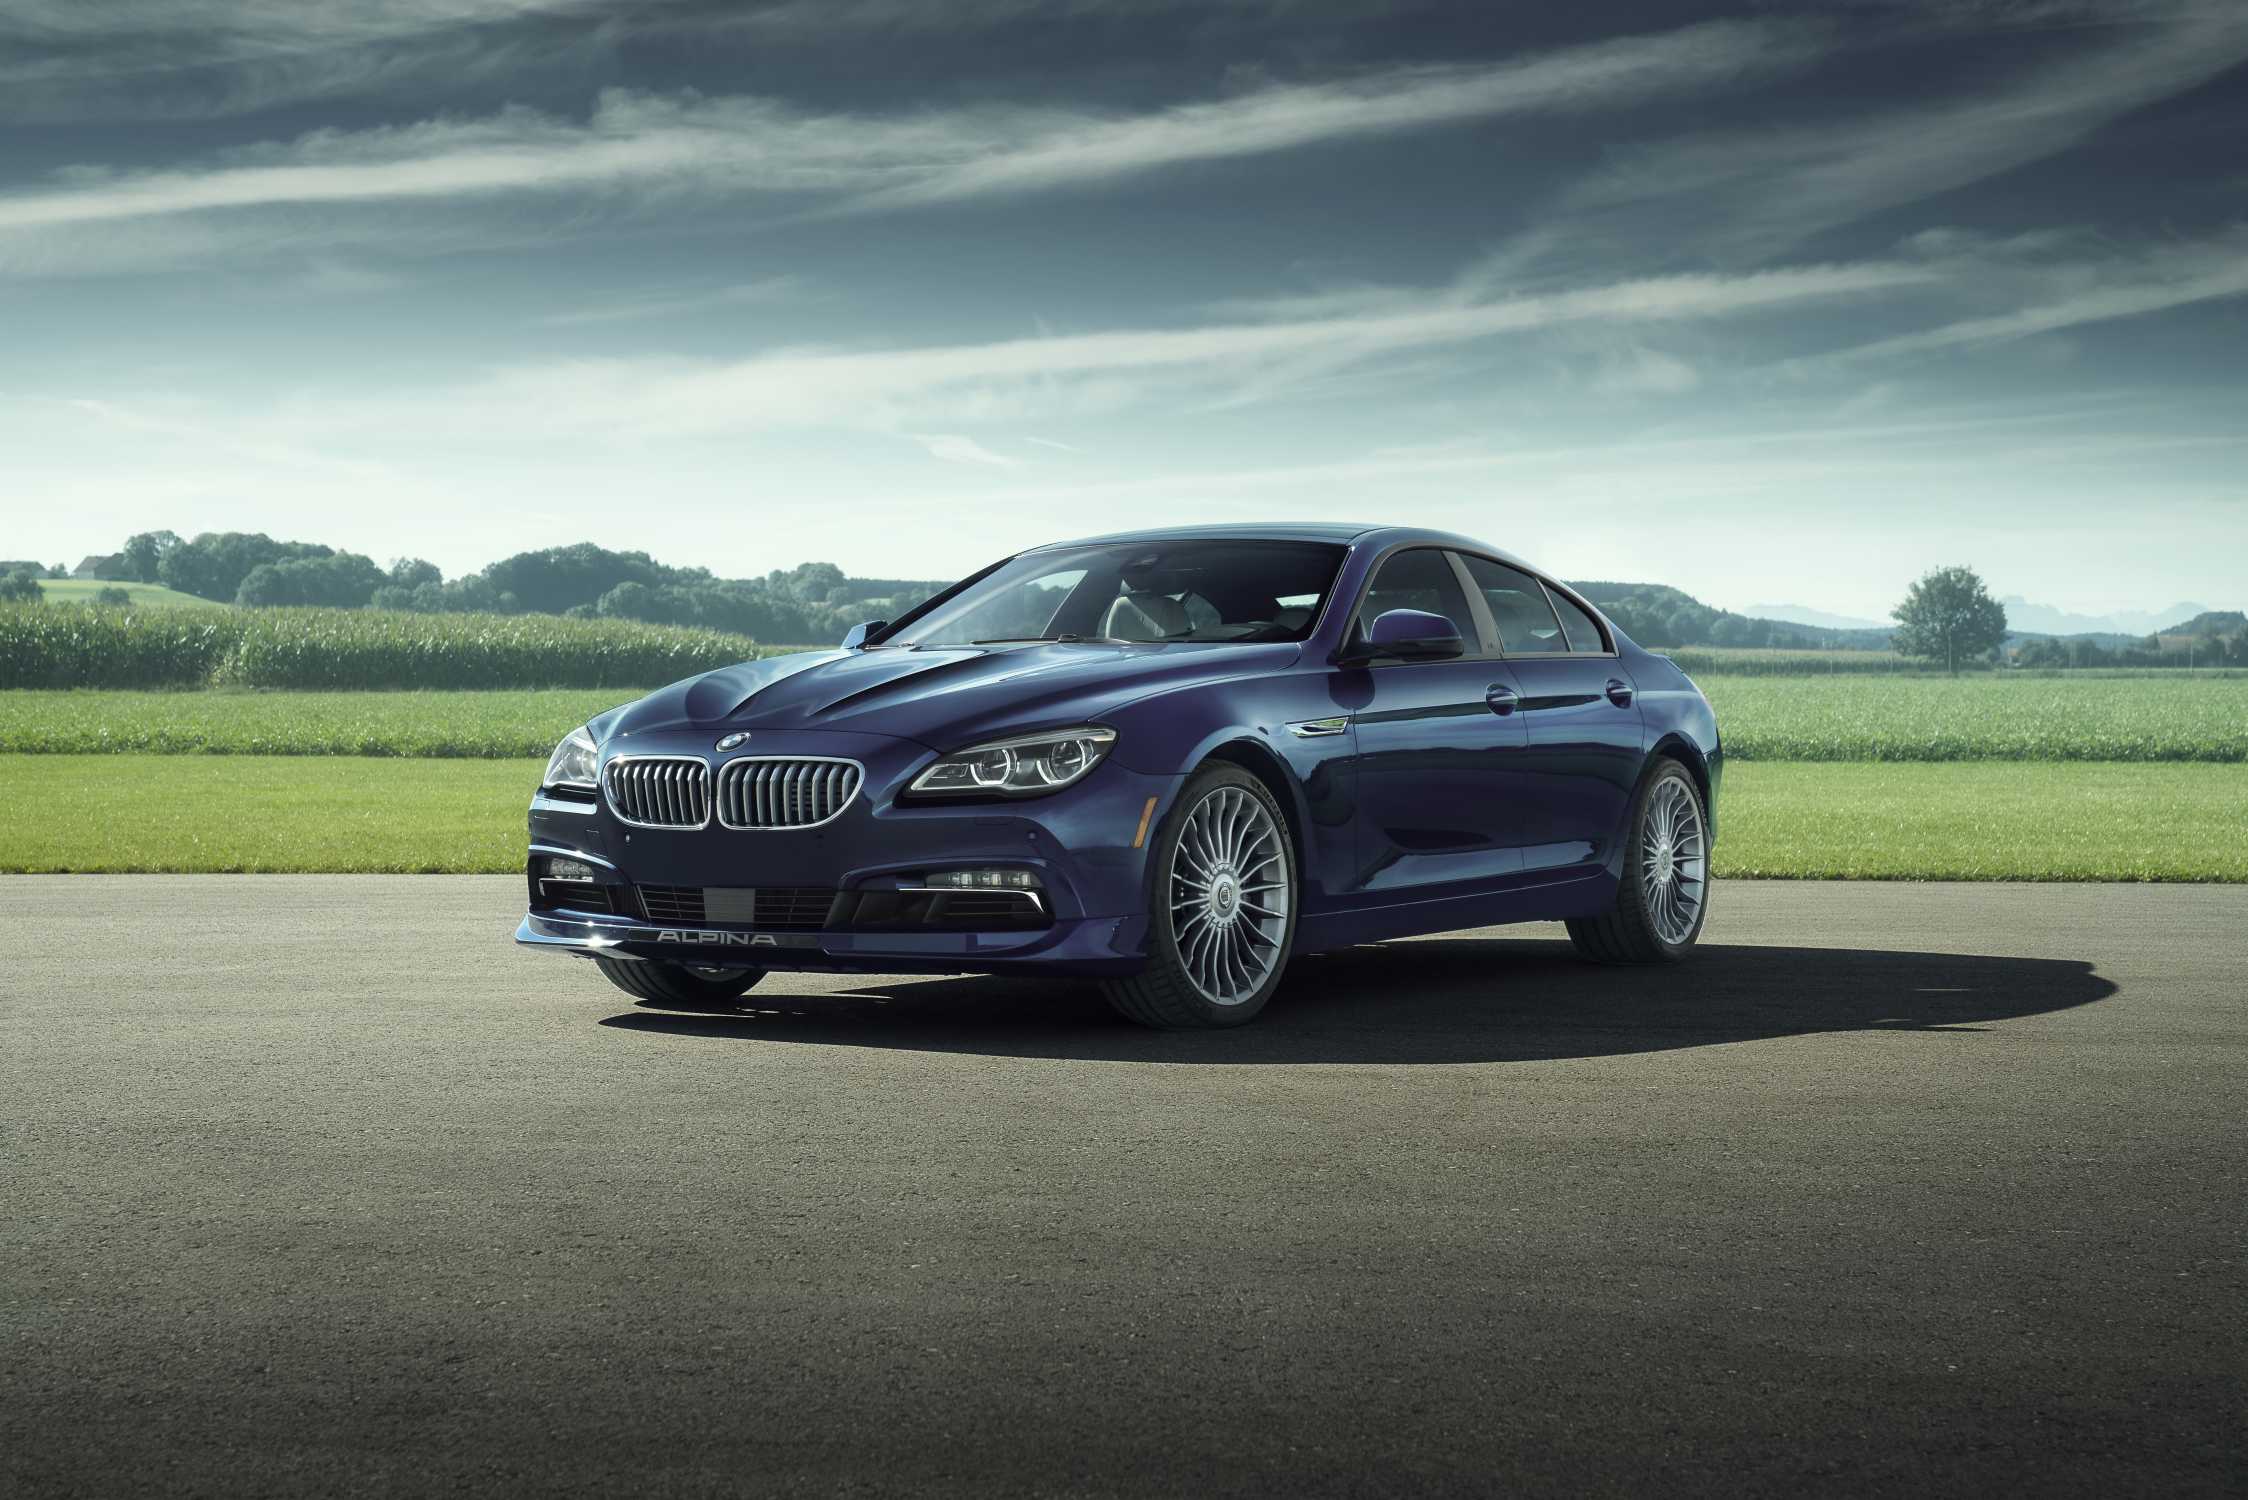 The BMW ALPINA B6 xDrive Gran Coupe BMW CCA Edition – One Of A Kind.